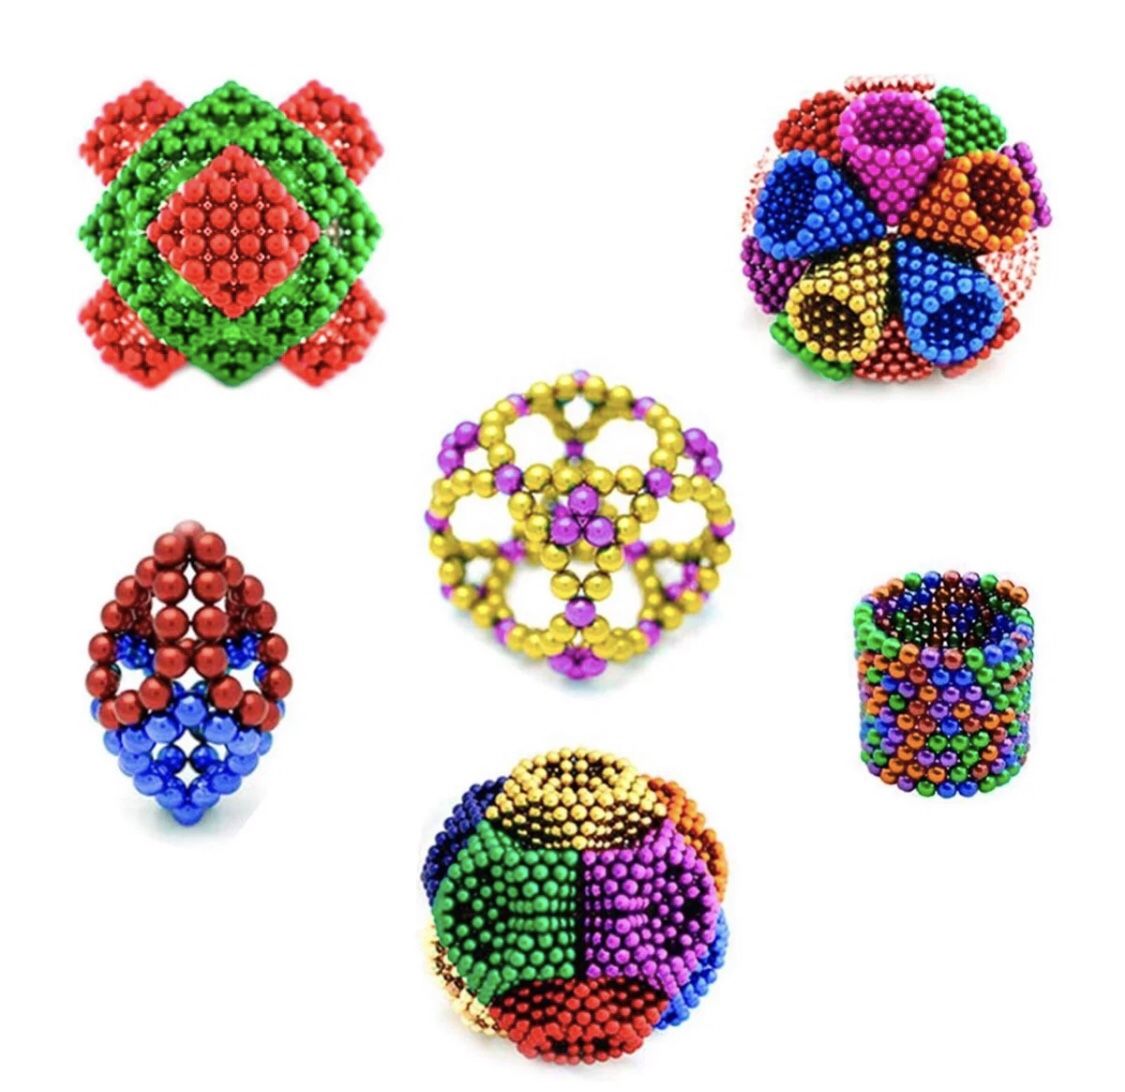 Best Gift for Christmas for Everyone - Magnetic Balls Fidget Toy Set Desk Toy